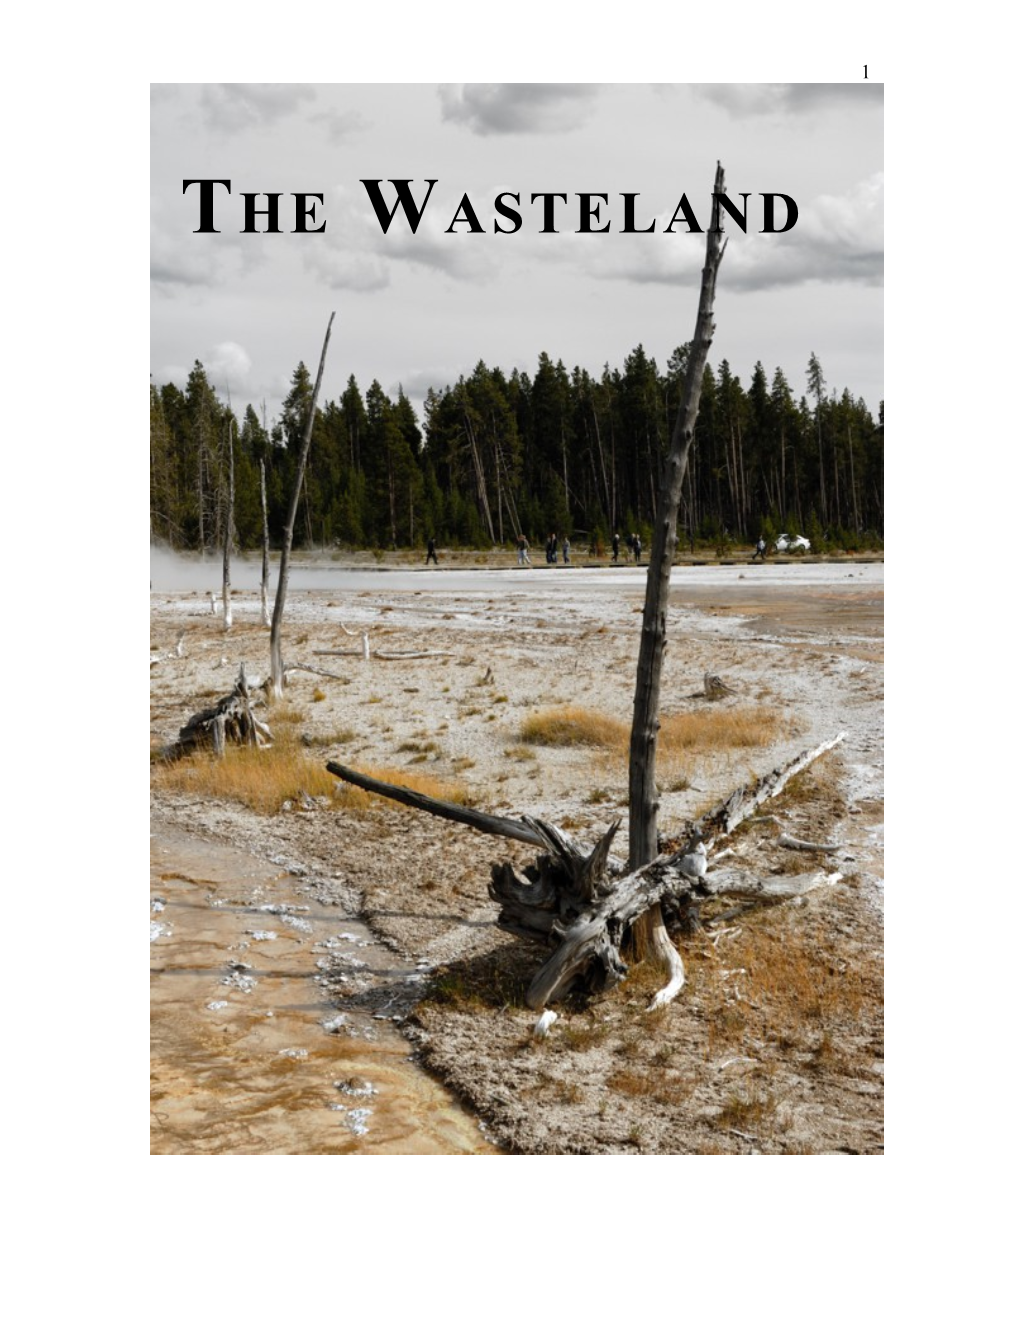 The Wasteland by Alan Paton